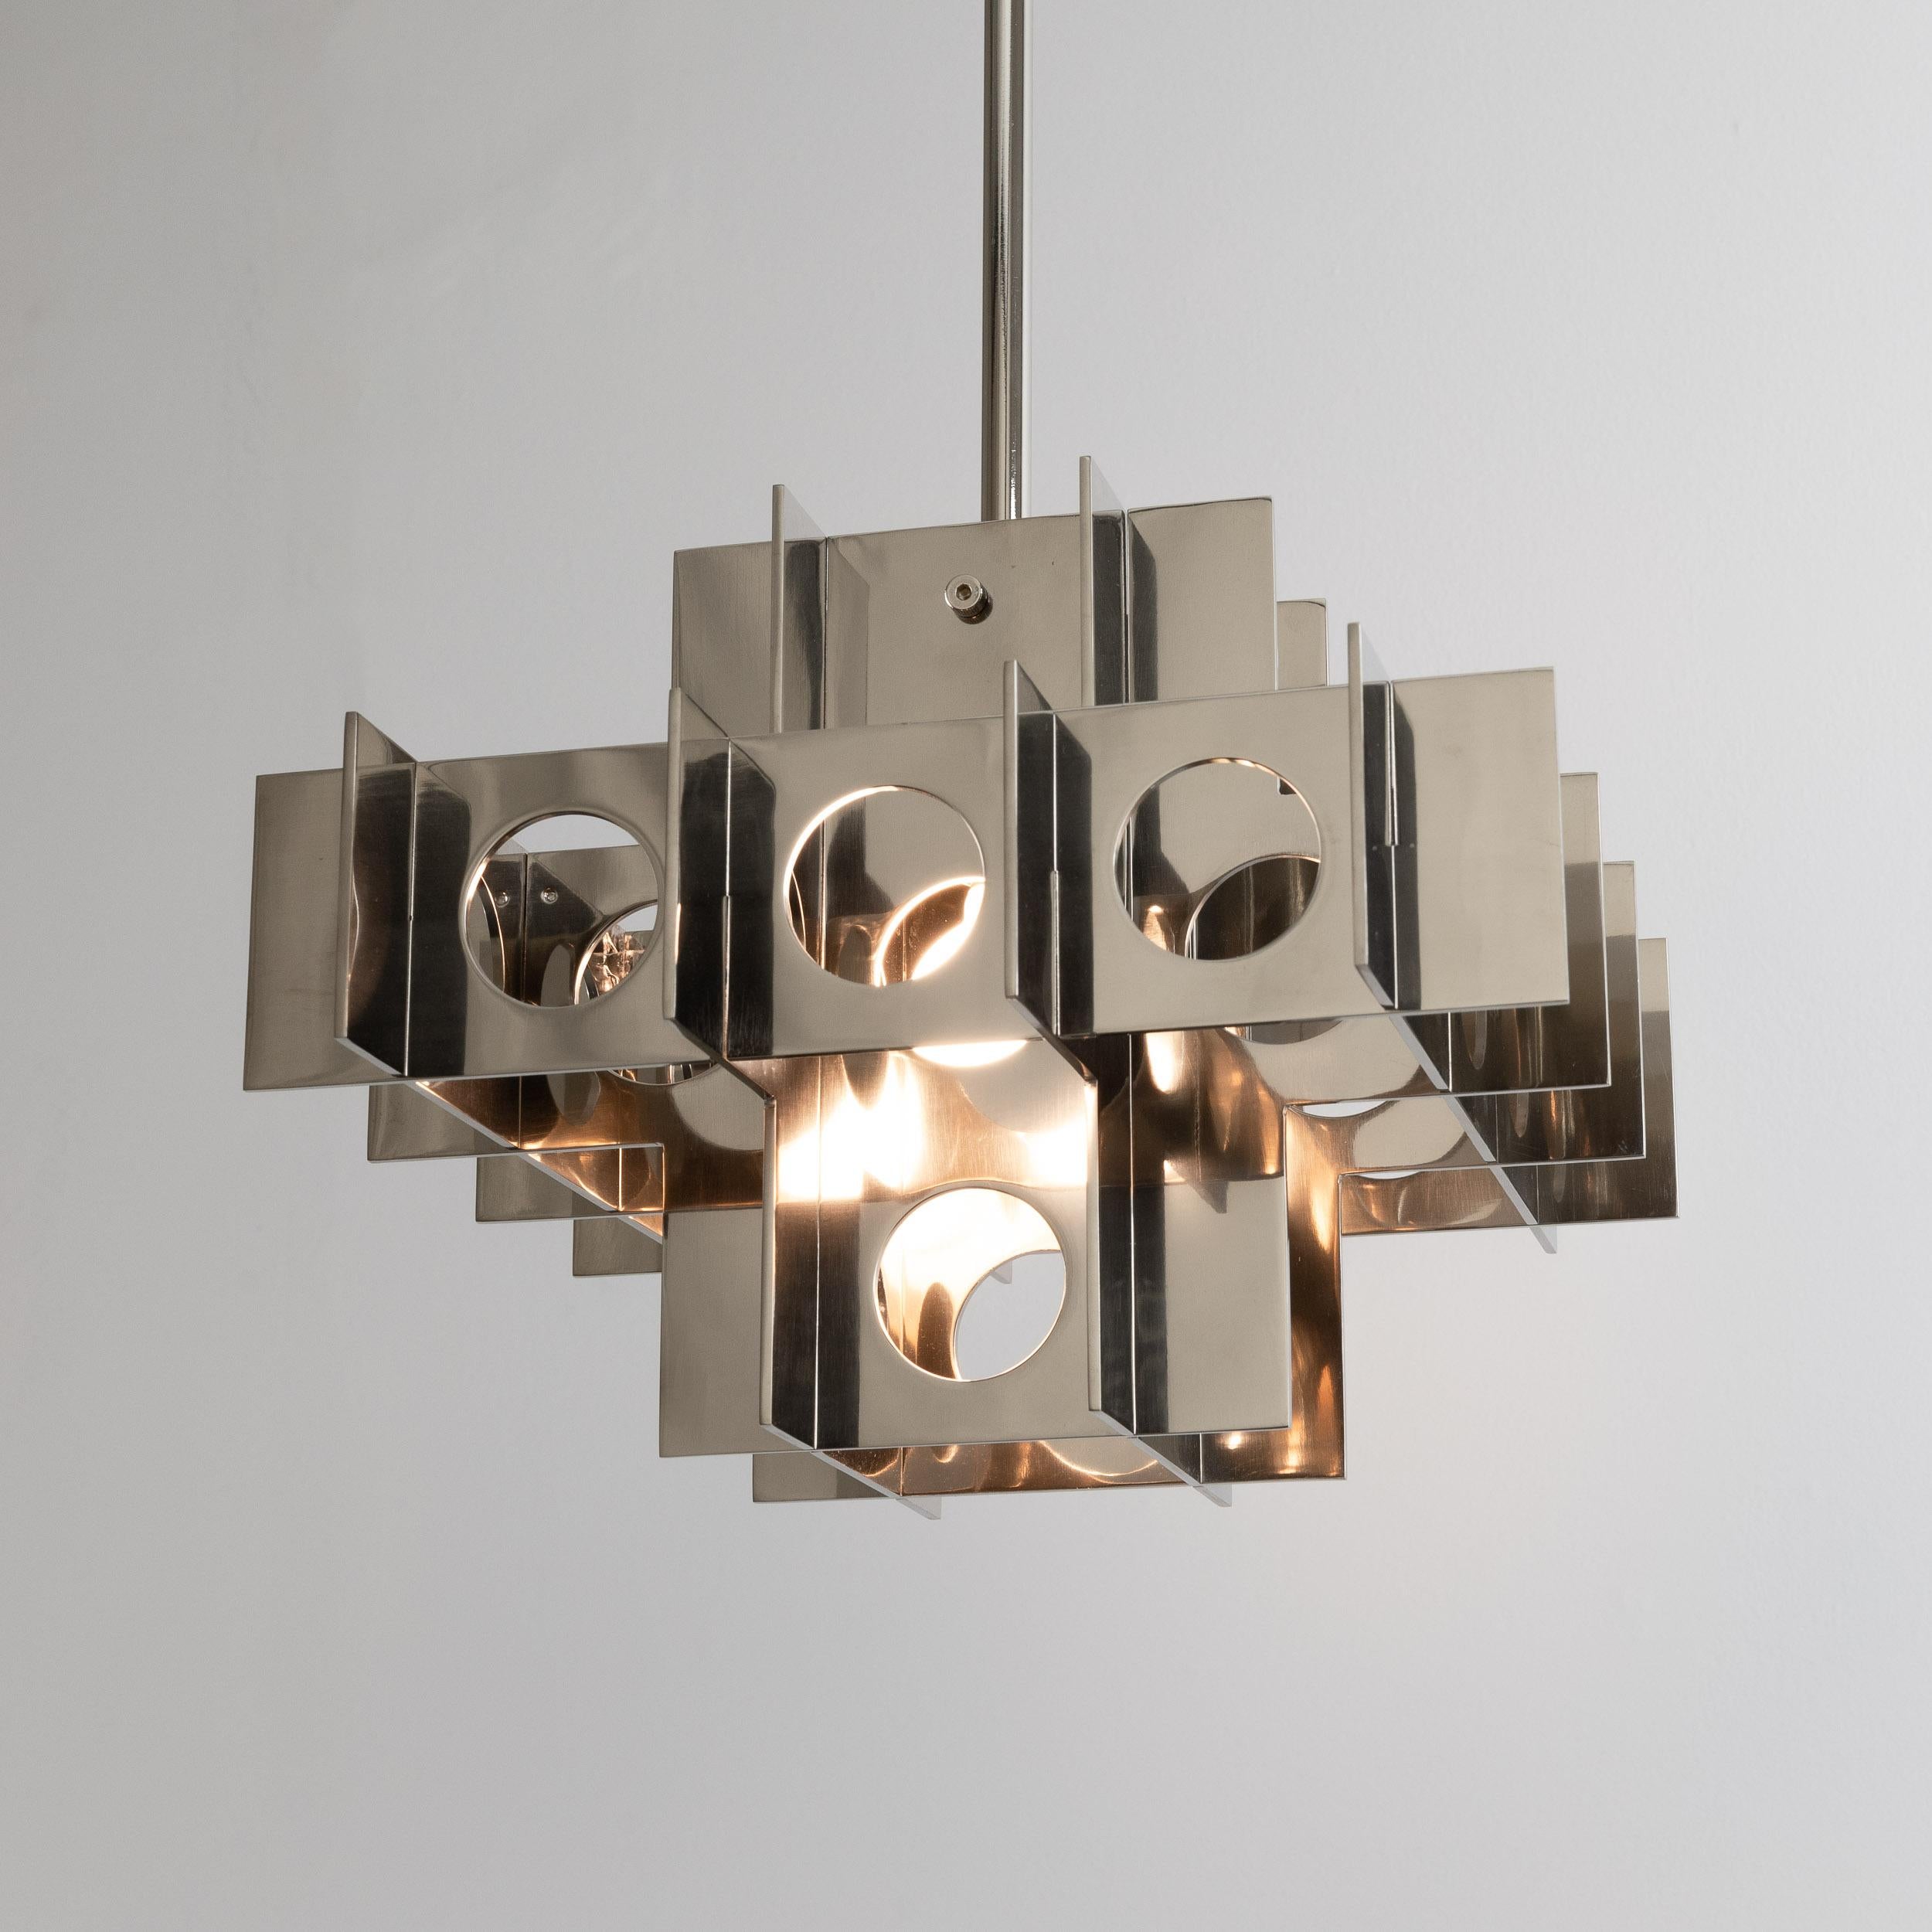 TENFOLD PENDANT 3TB 18inch by Luft Tanaka Studio

Composed of interlocking mirror polished metal panels, the Tenfold Series is inspired by the aesthetics, architectural styles, and art movements of the 1970s. The light fixture works well as a single